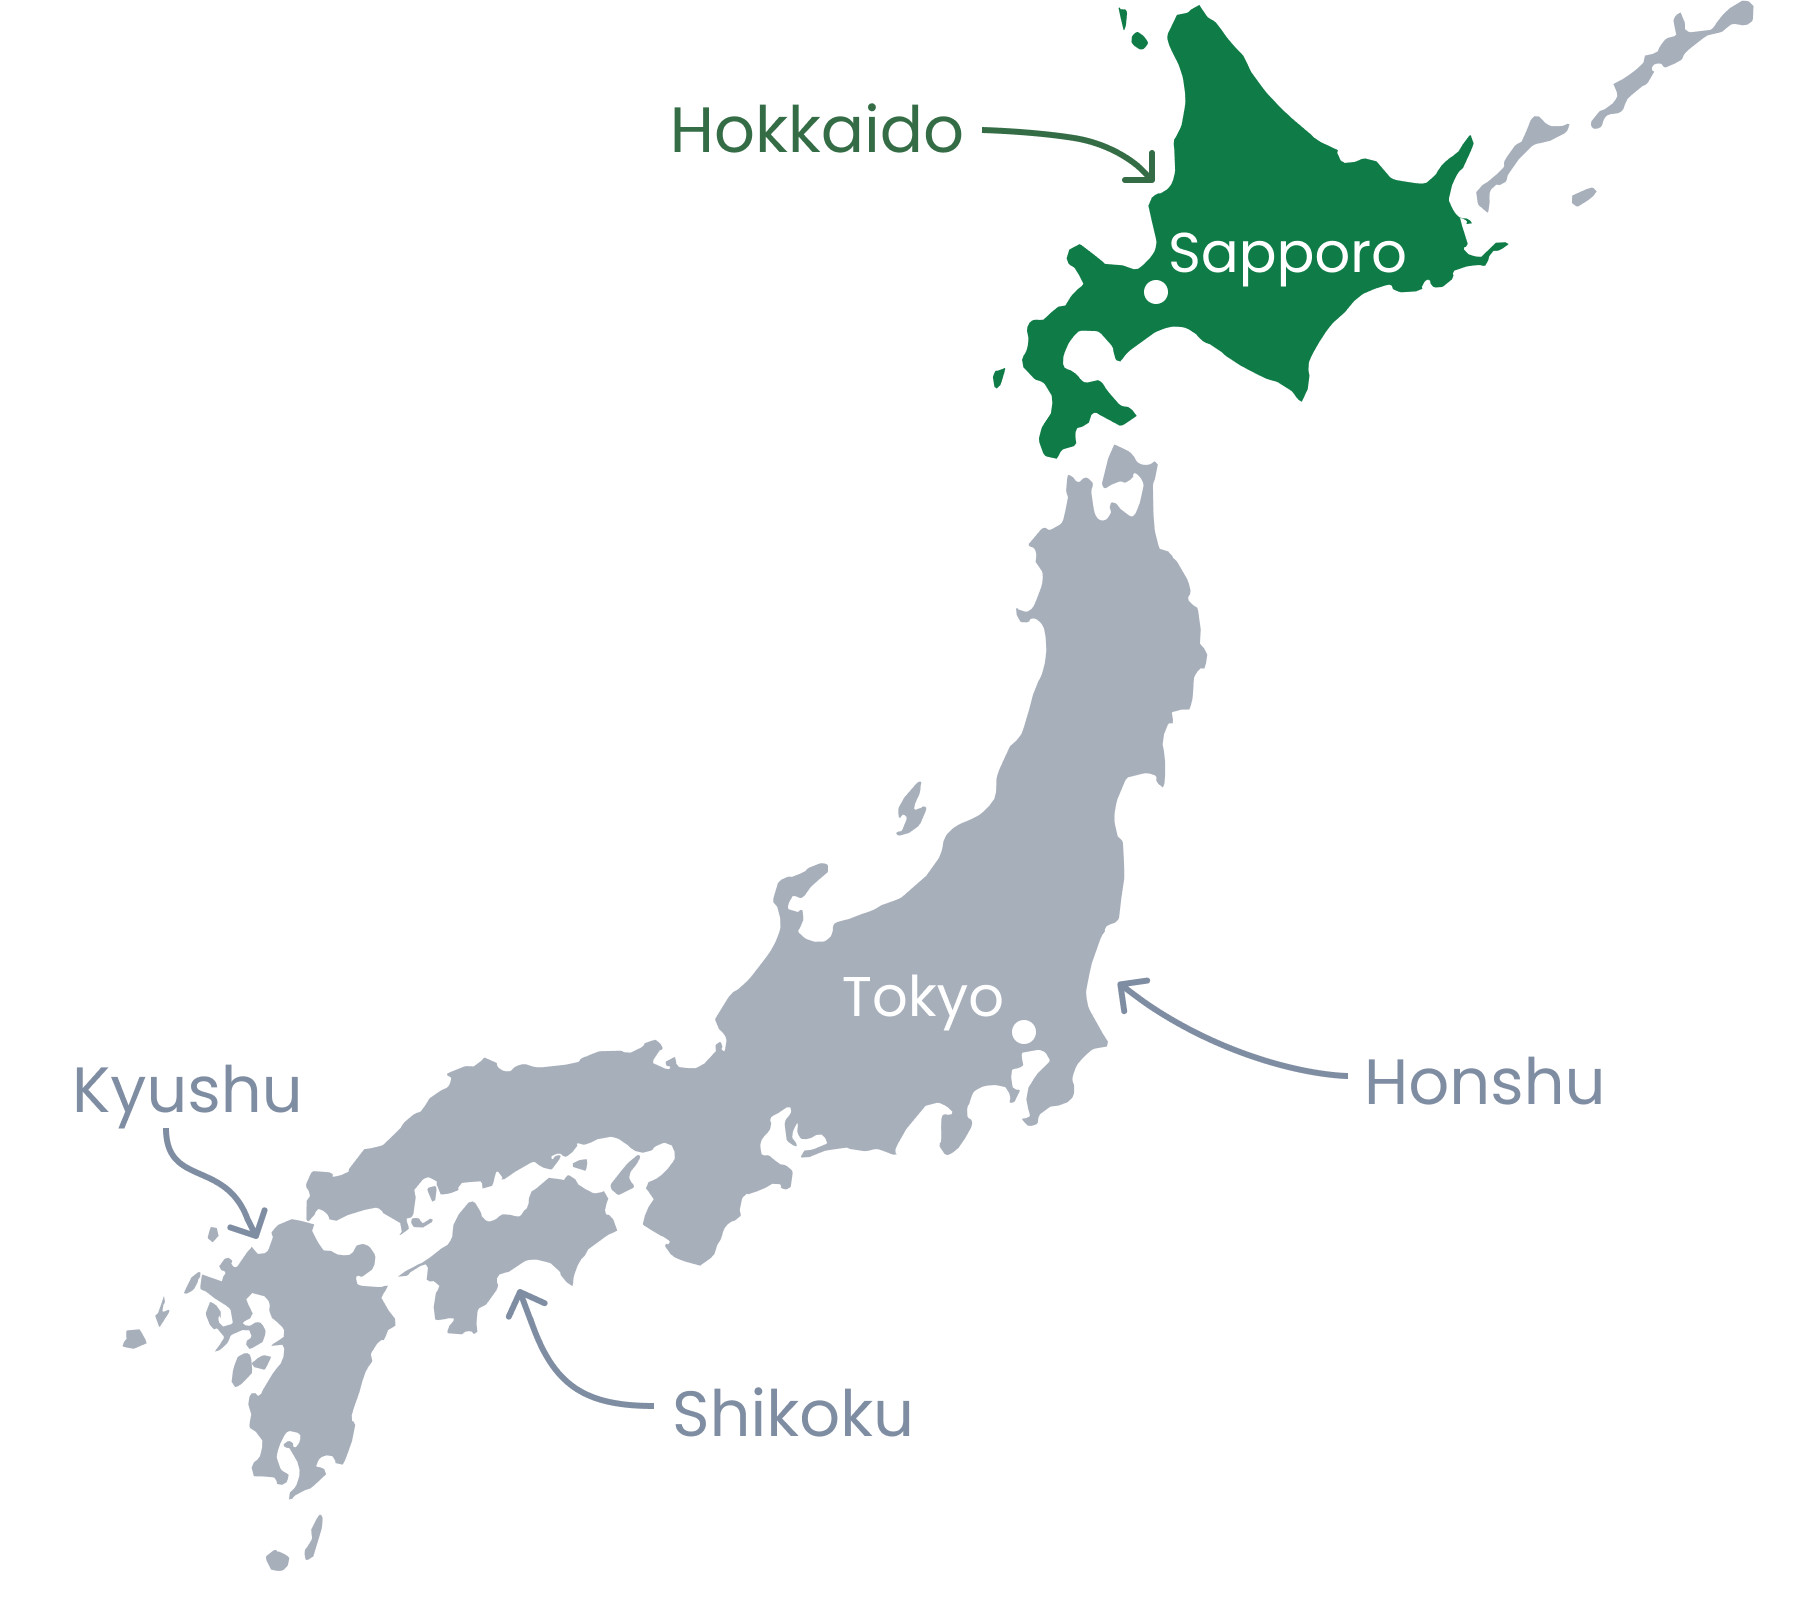 A map of Japan with the island of Hokkaido highlight in green. The four major islands of Japan, Hokkaido, Honshu, Shikoku and Kyushu are labeled - as are the locations of Sapporo and Tokyo.